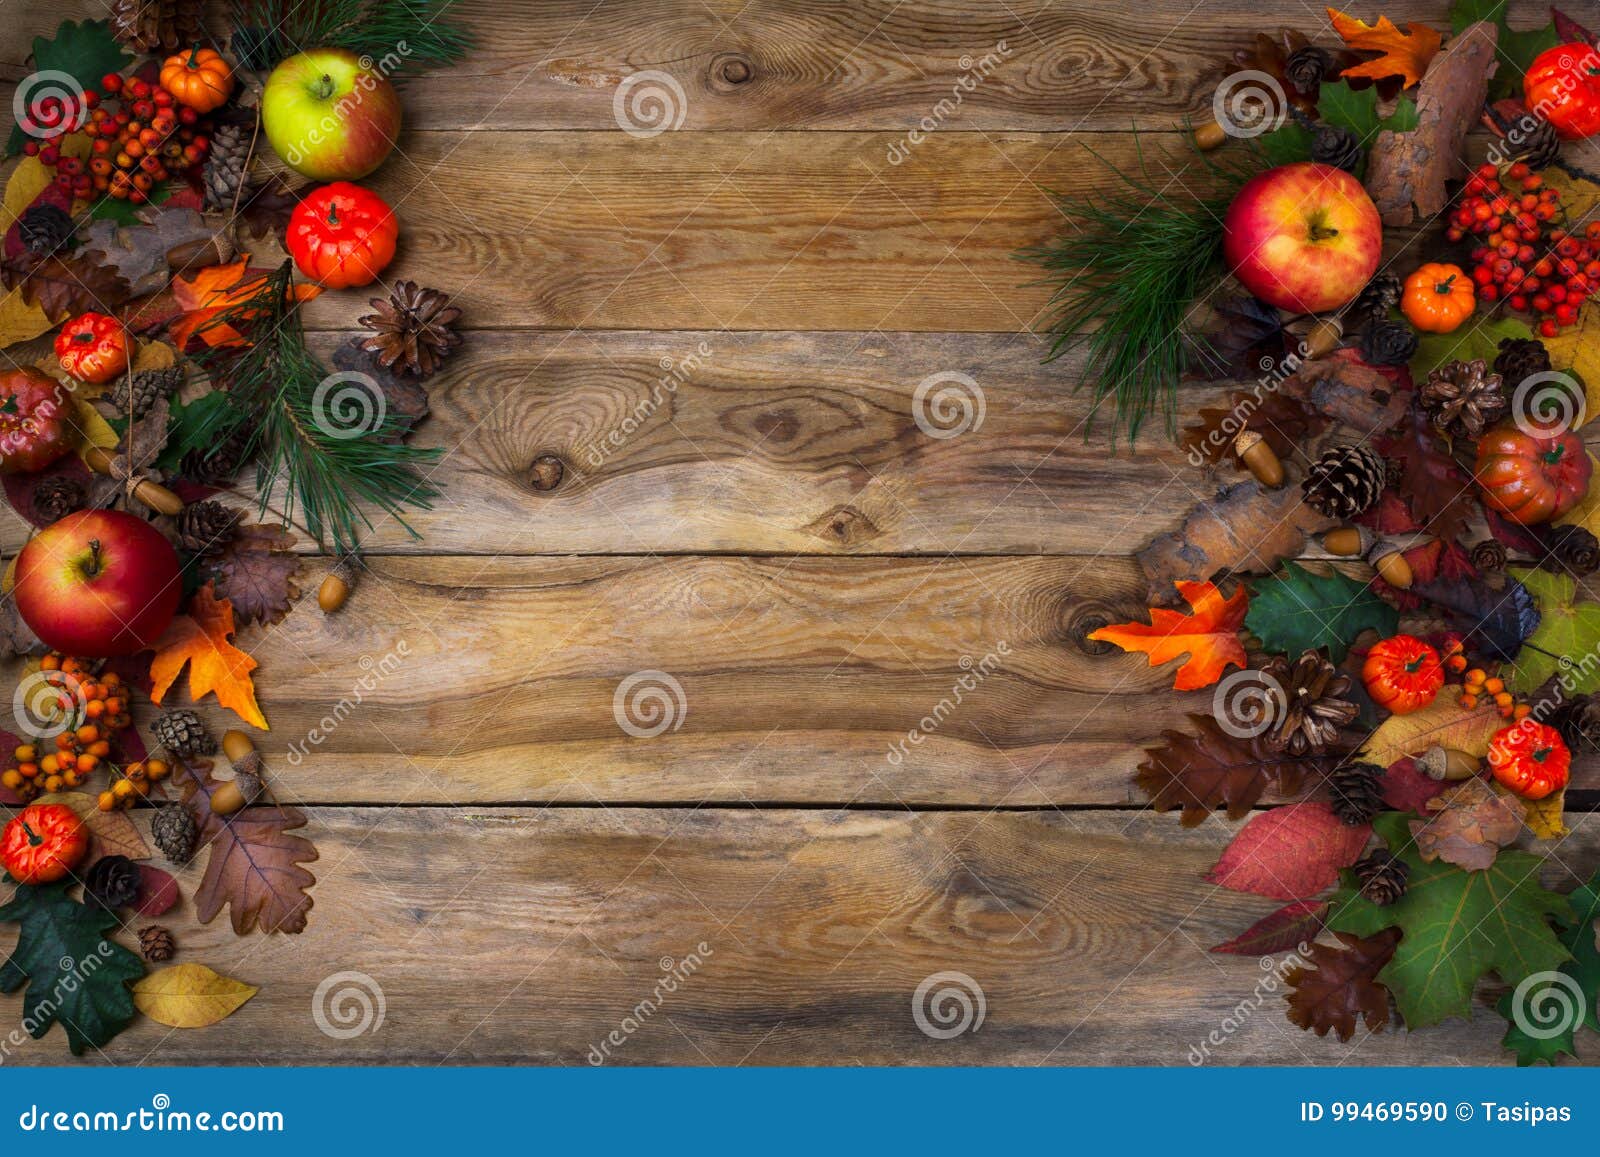 Rustic Thanksgiving Decoration with Pumpkins and Cones Stock Photo ...